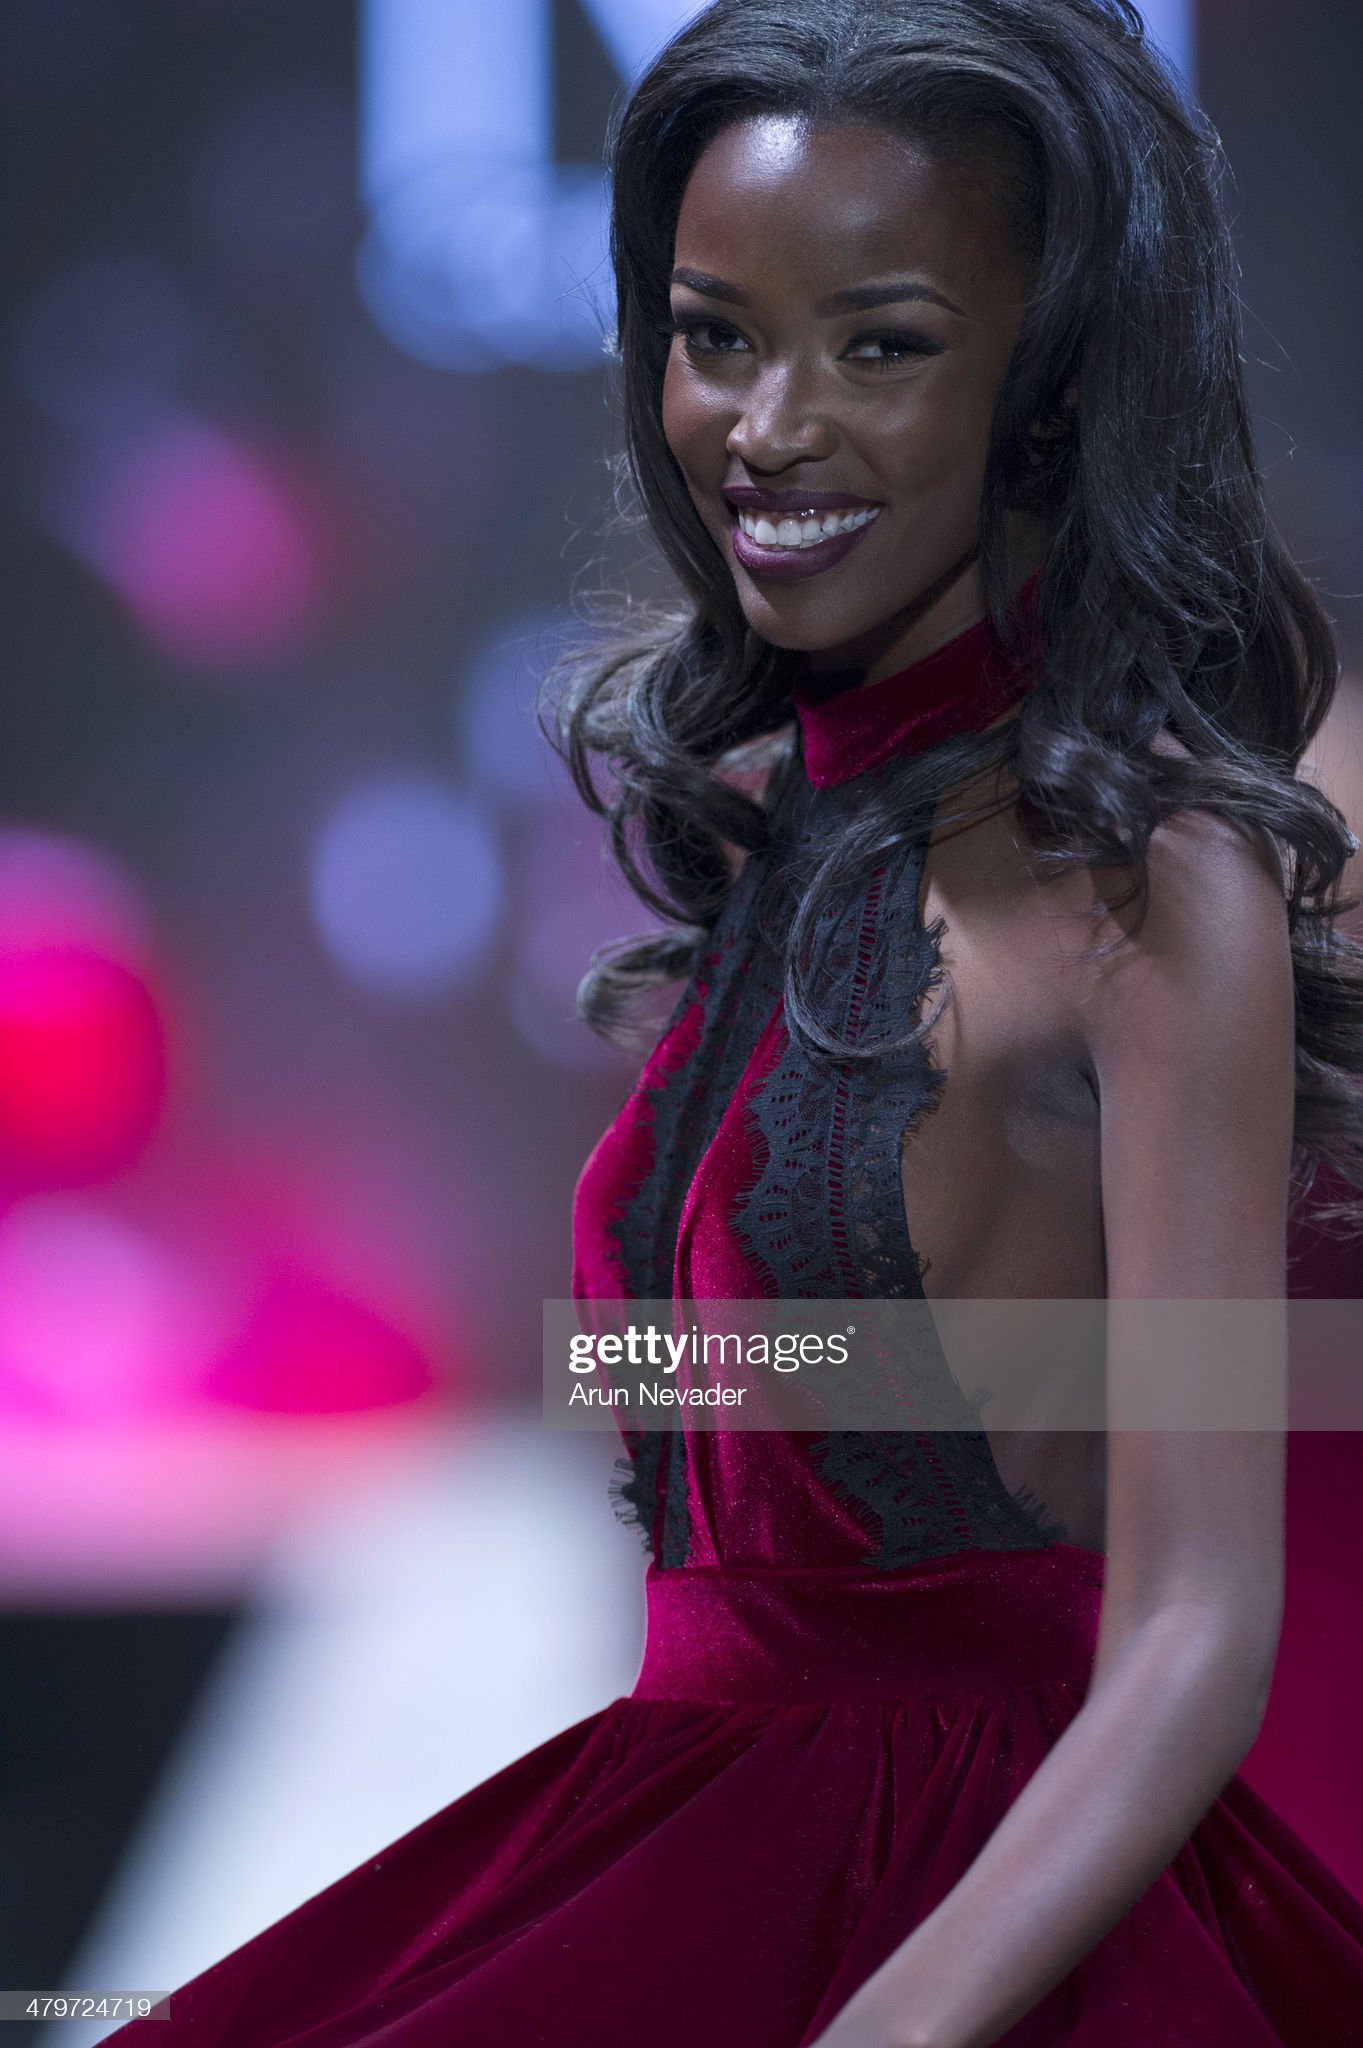 PALM DESERT, CA - MARCH 19:  Tia Shipman walks the runway during the finale for the MT Costello fashion show during Project Runway at El Paseo Fashion Week 2014 on March 19, 2014 in Palm Desert, California.  (Photo by Arun Nevader/WireImage)